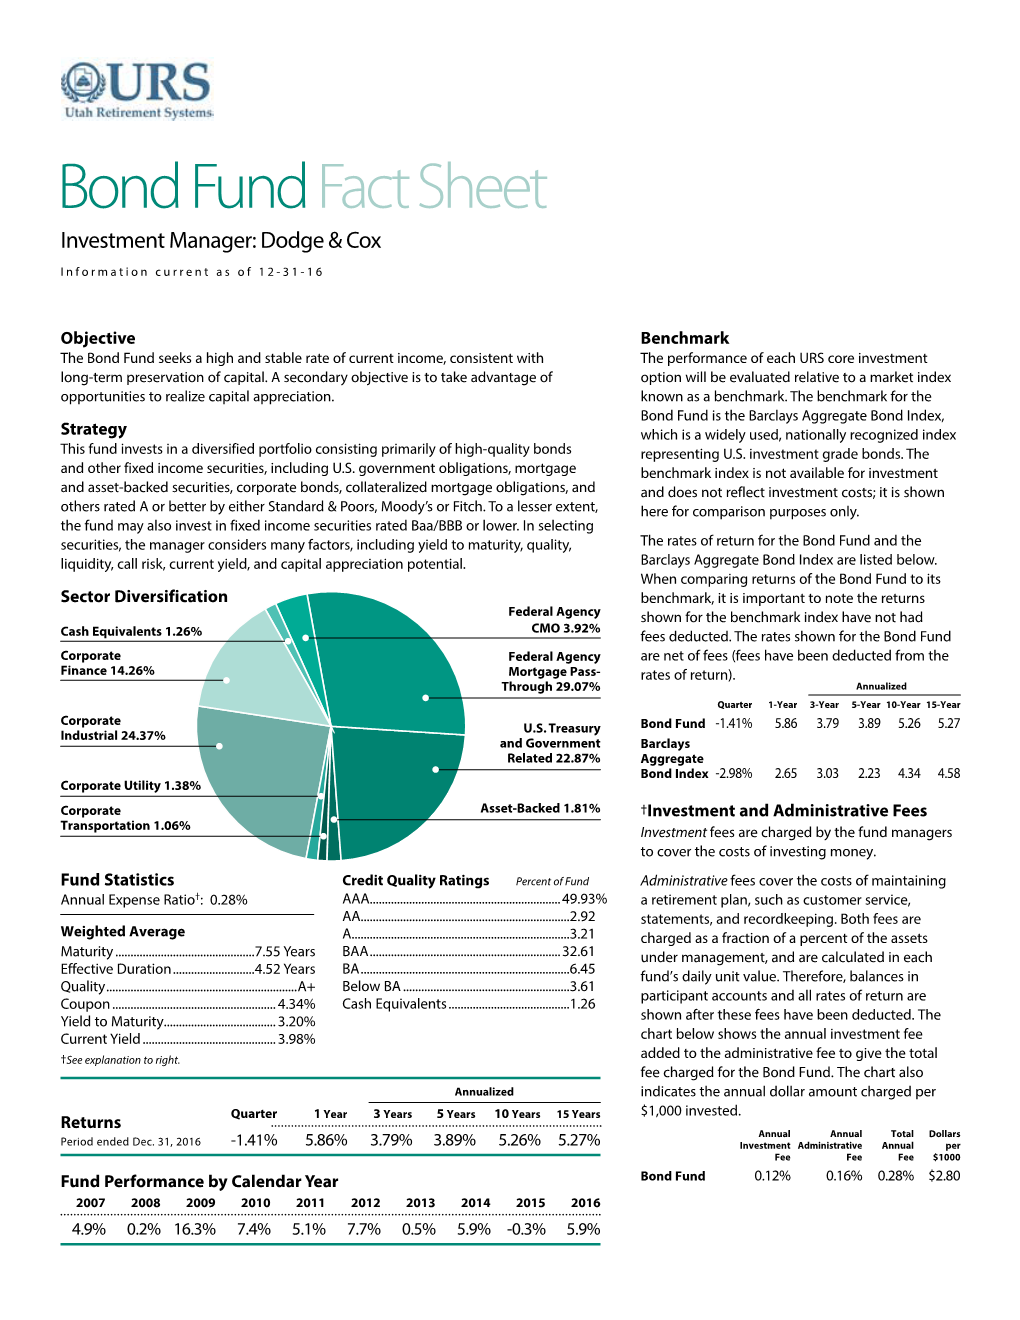 Bond Fund Fact Sheet Investment Manager: Dodge & Cox